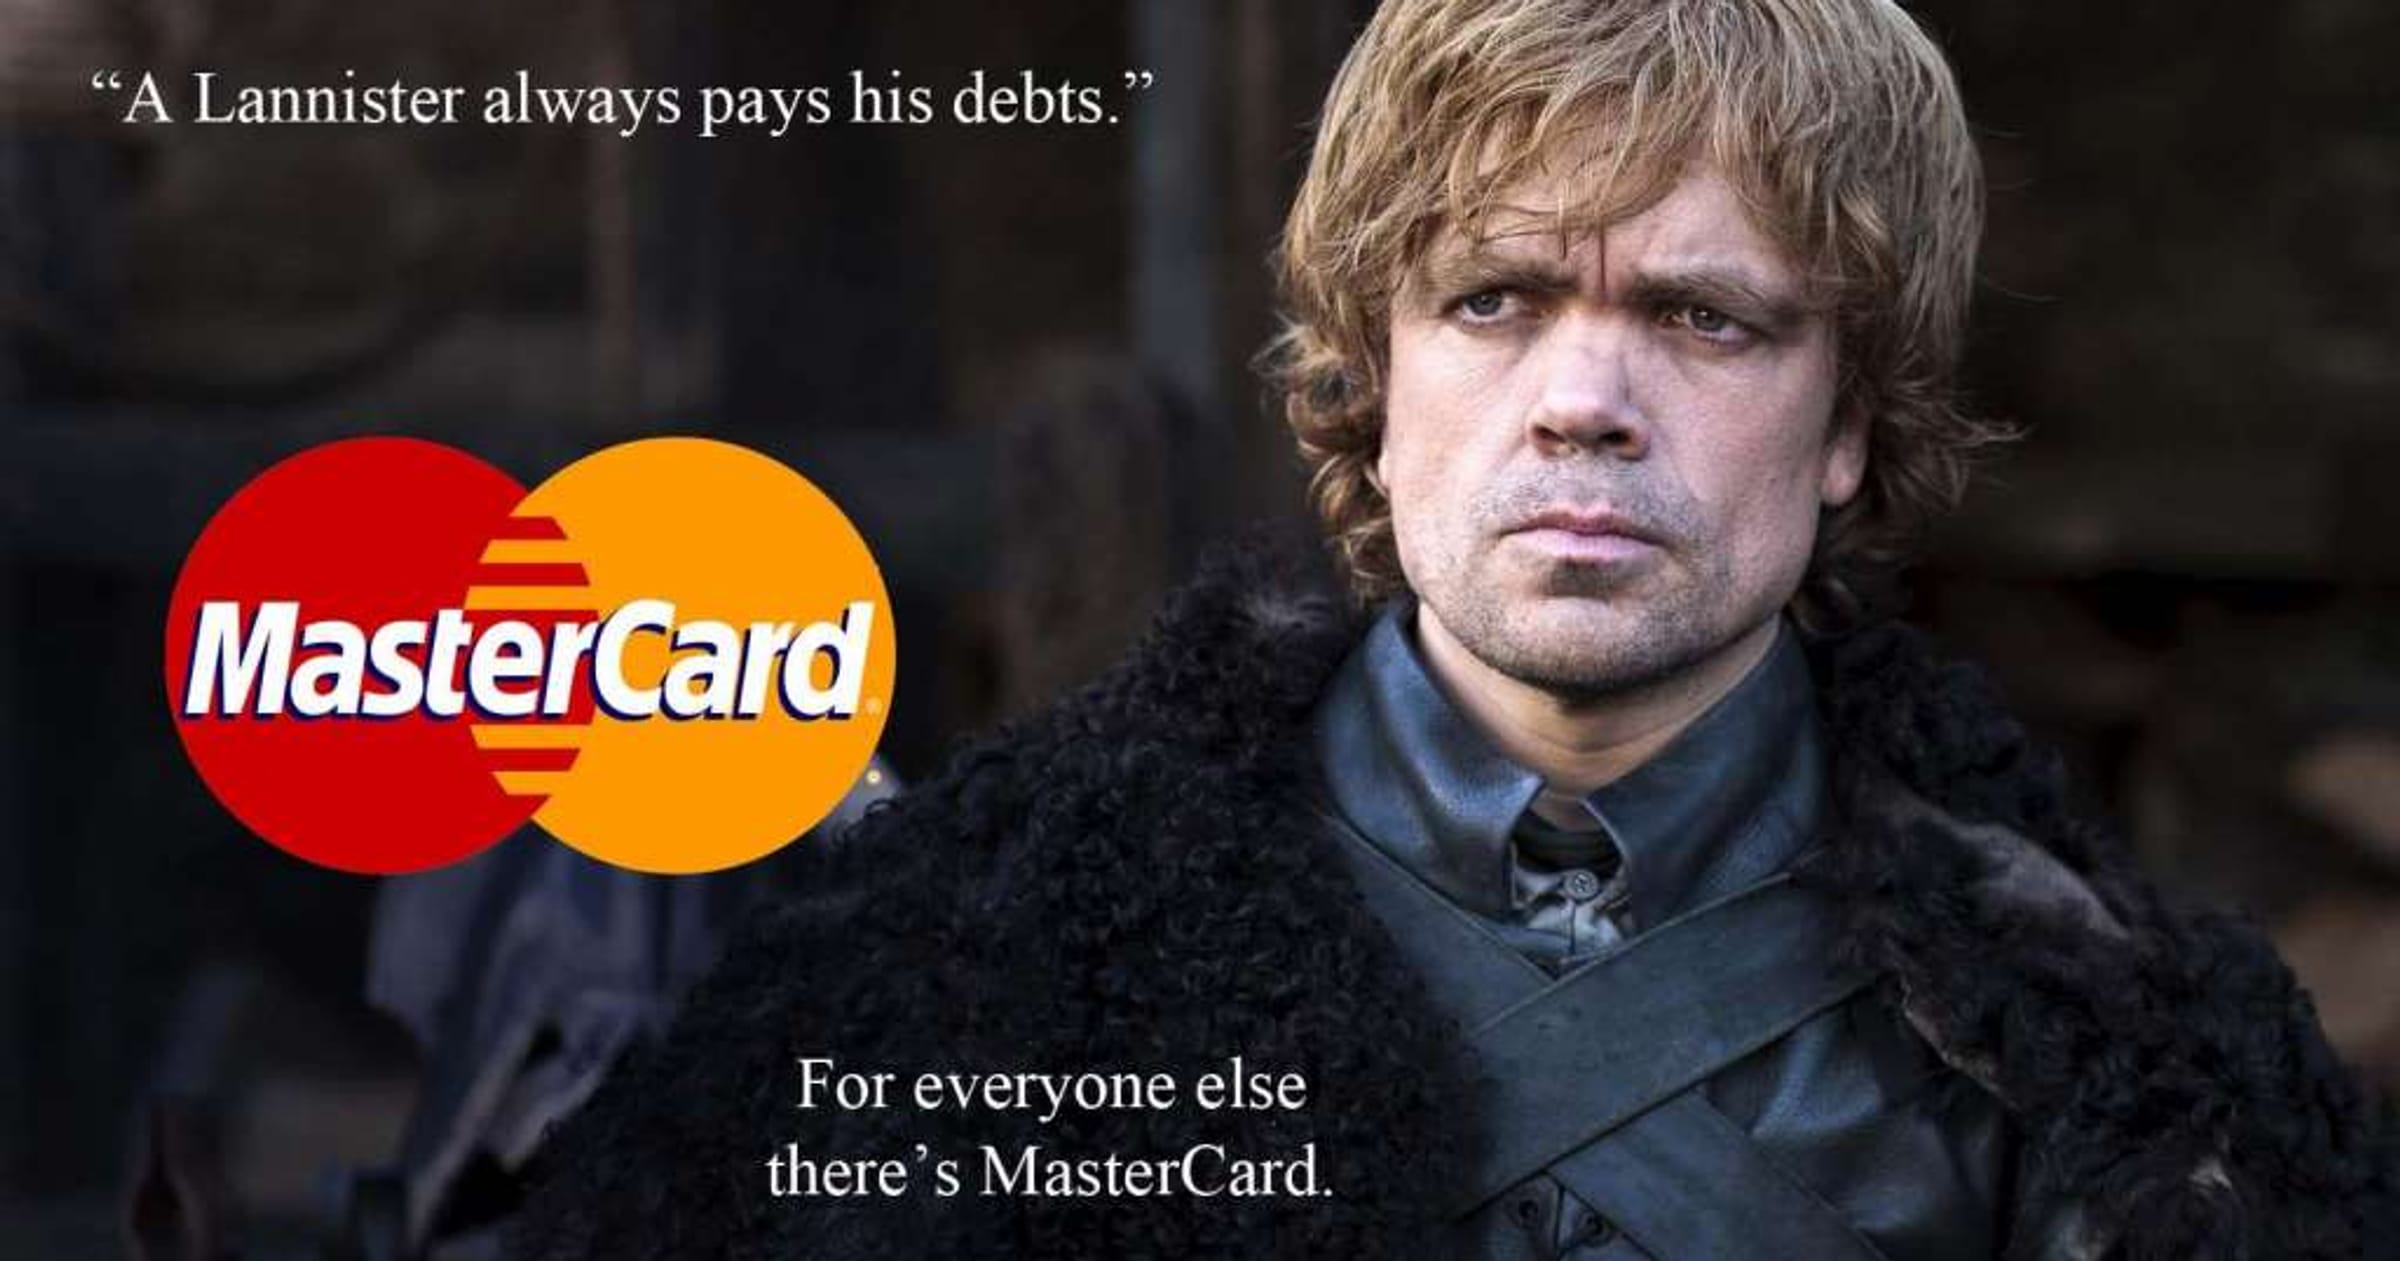 Game of Thrones / Memes - TV Tropes